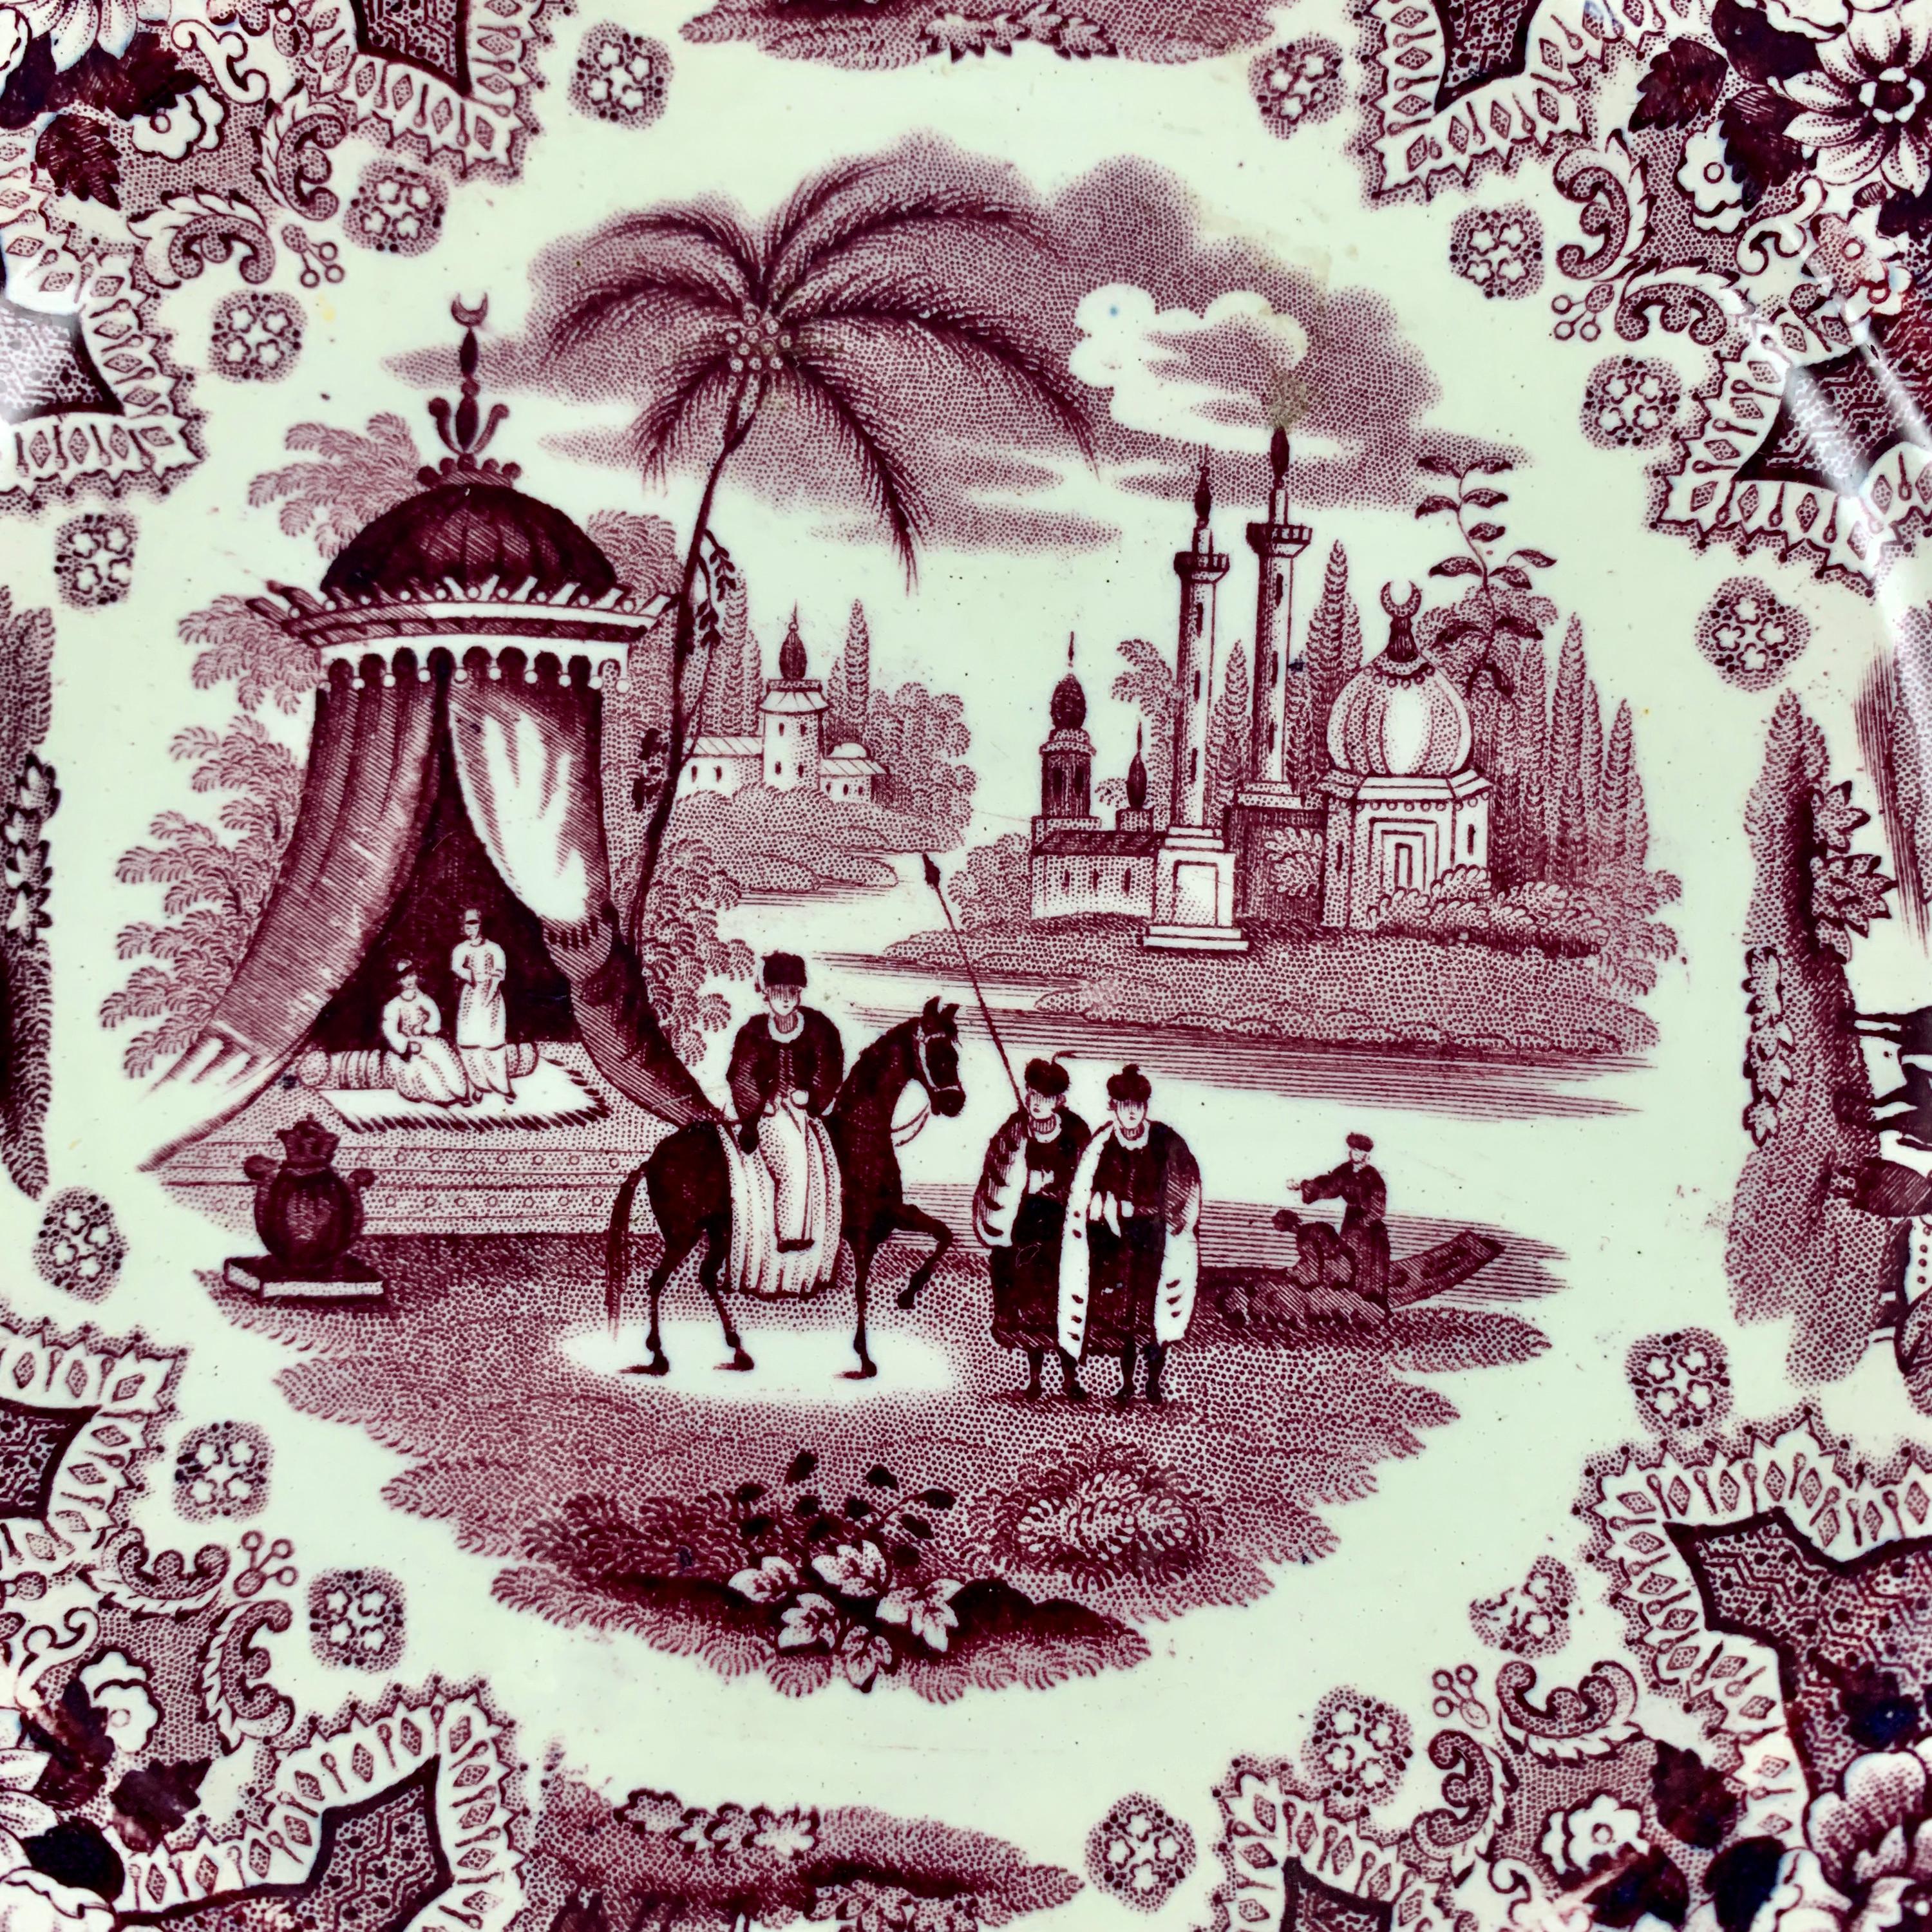 From William Adams IV & Sons, Stoke-on-Trent, Staffordshire, a purple transferware plate in the Palestine pattern, circa 1829–1861.

The Palestine pattern is inspired by the Holy Land that lies between the Mediterranean and the Dead Seas. A